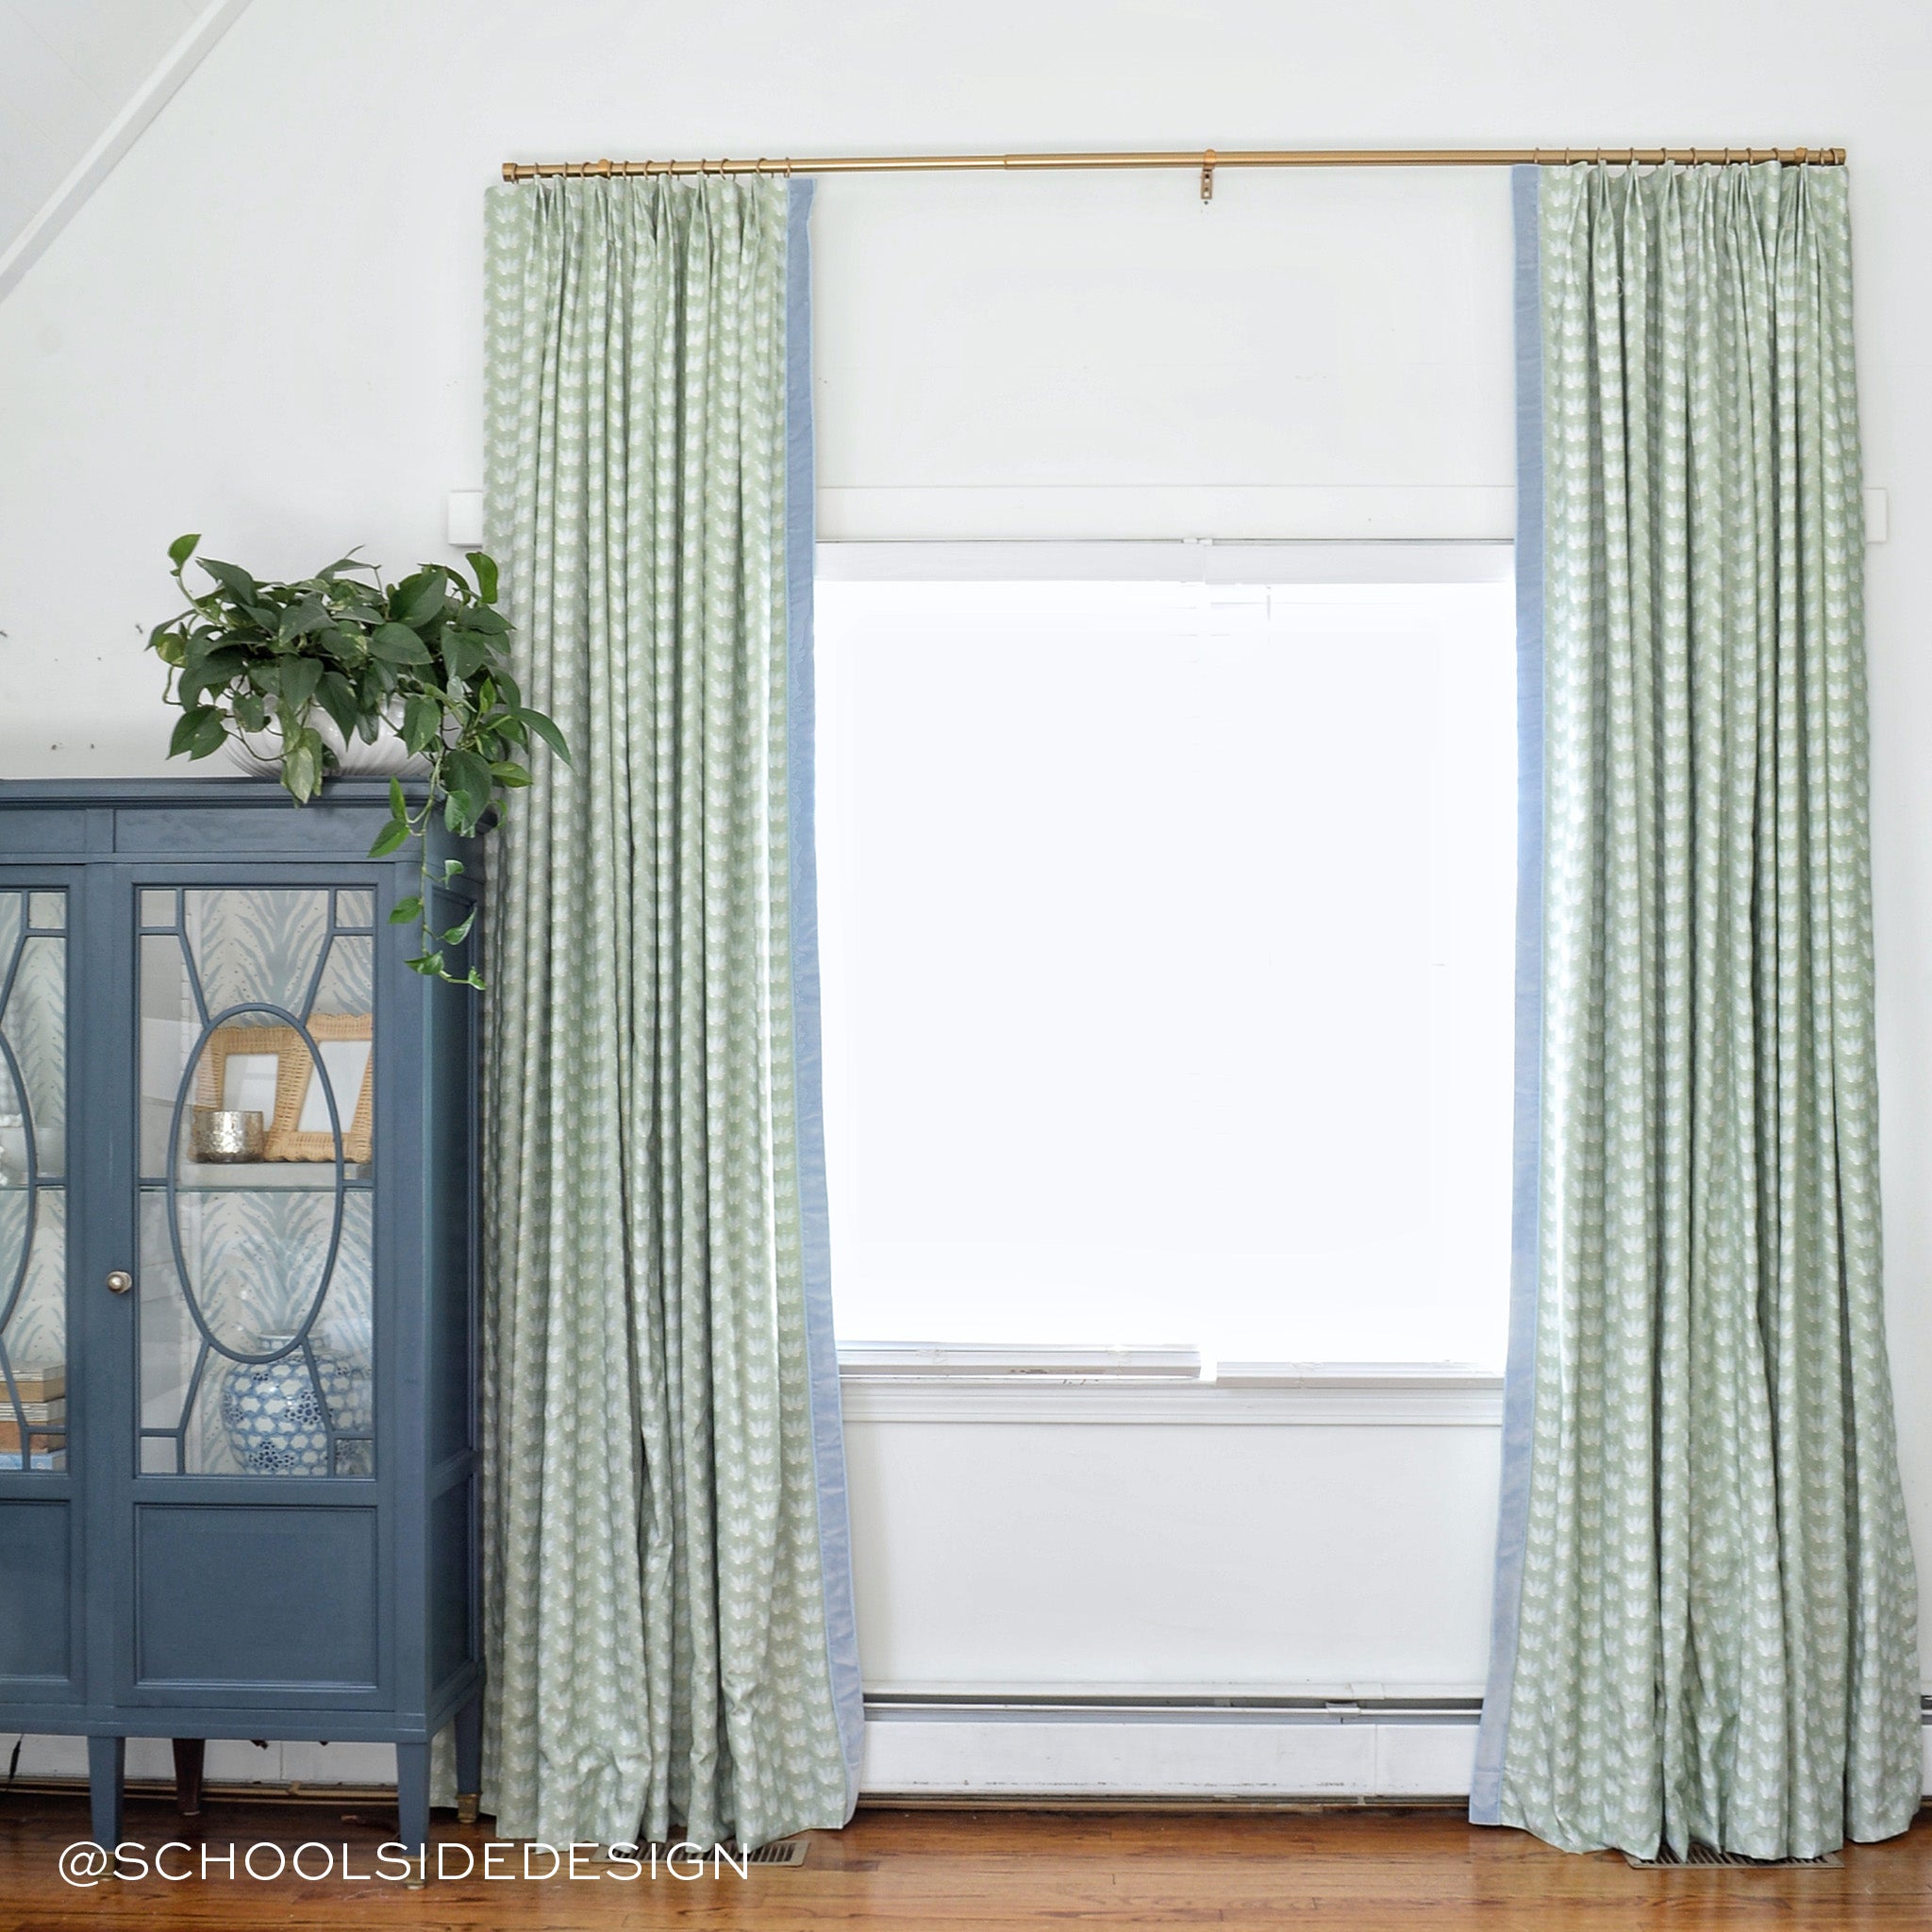 Window styled with Blue & Green Floral Drop Repeat Printed Curtains with sky blue band next to navy blue cabinets. Photo taken by School Side Design